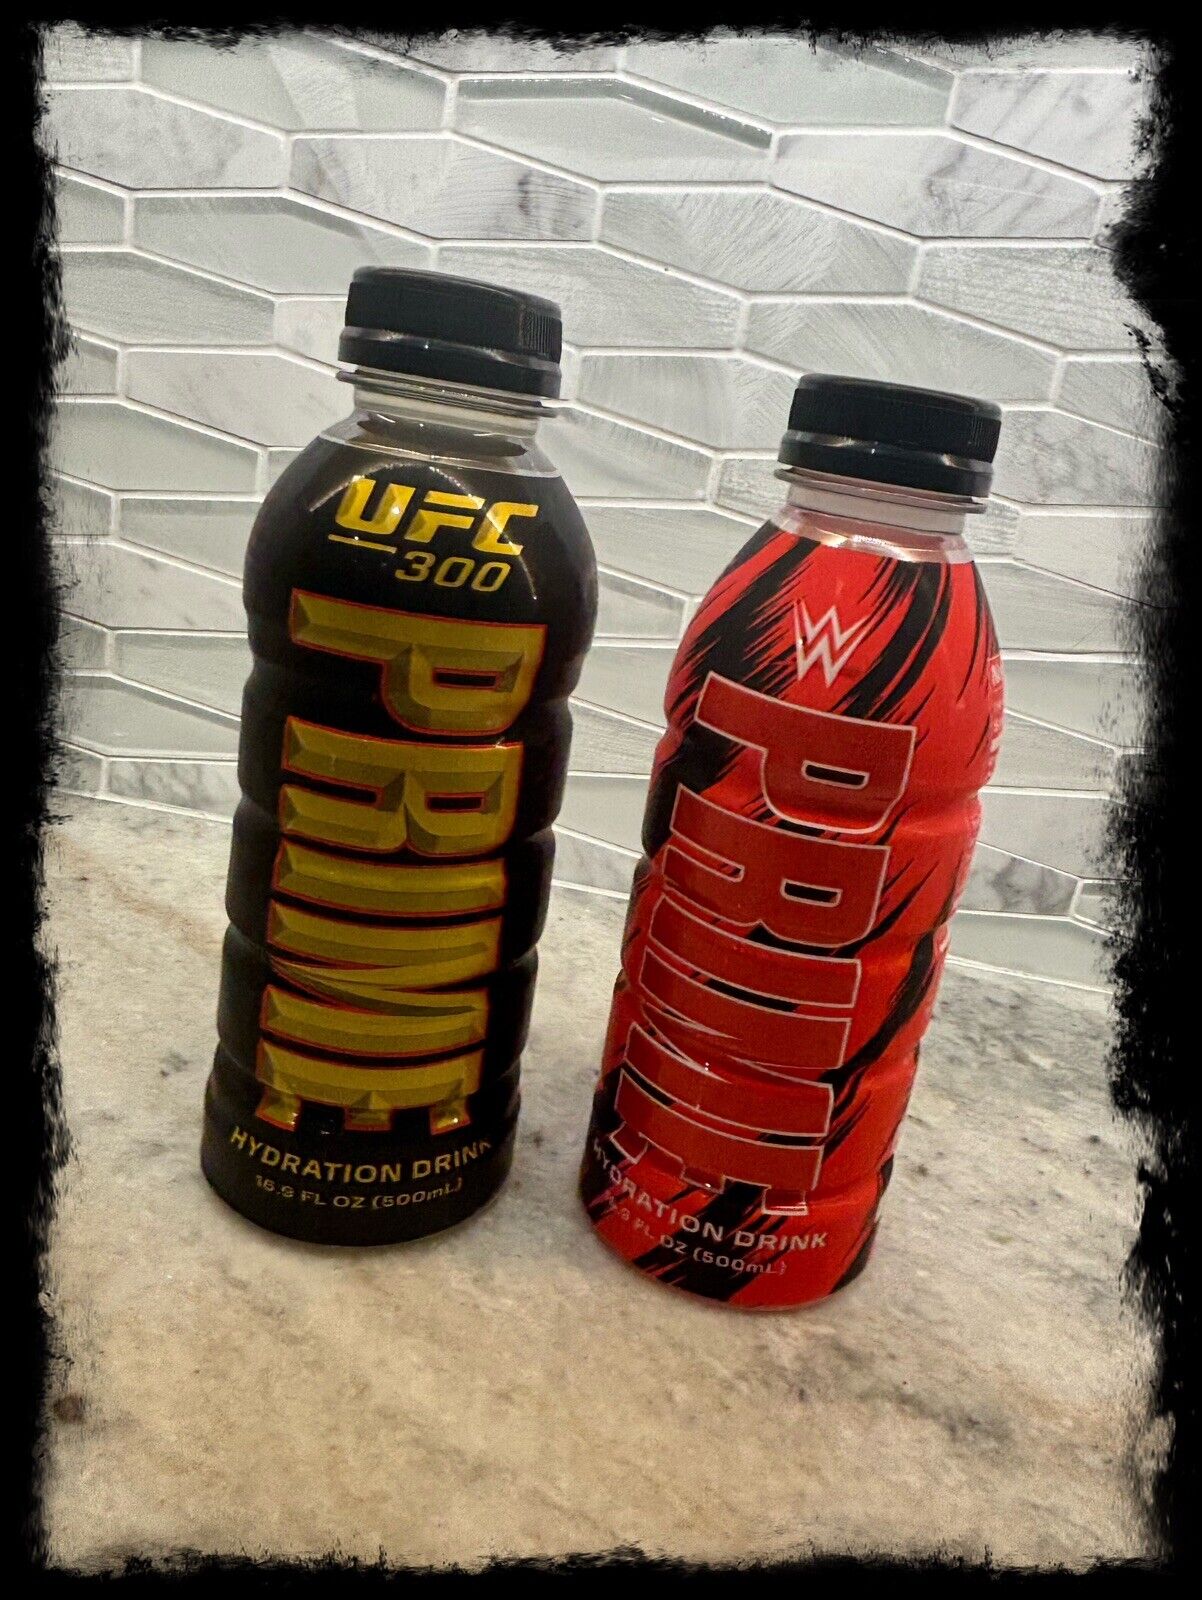 UFC 300 & WWE Prime Hydration Drink Limited Edition Full Bottles 16.9oz In hand